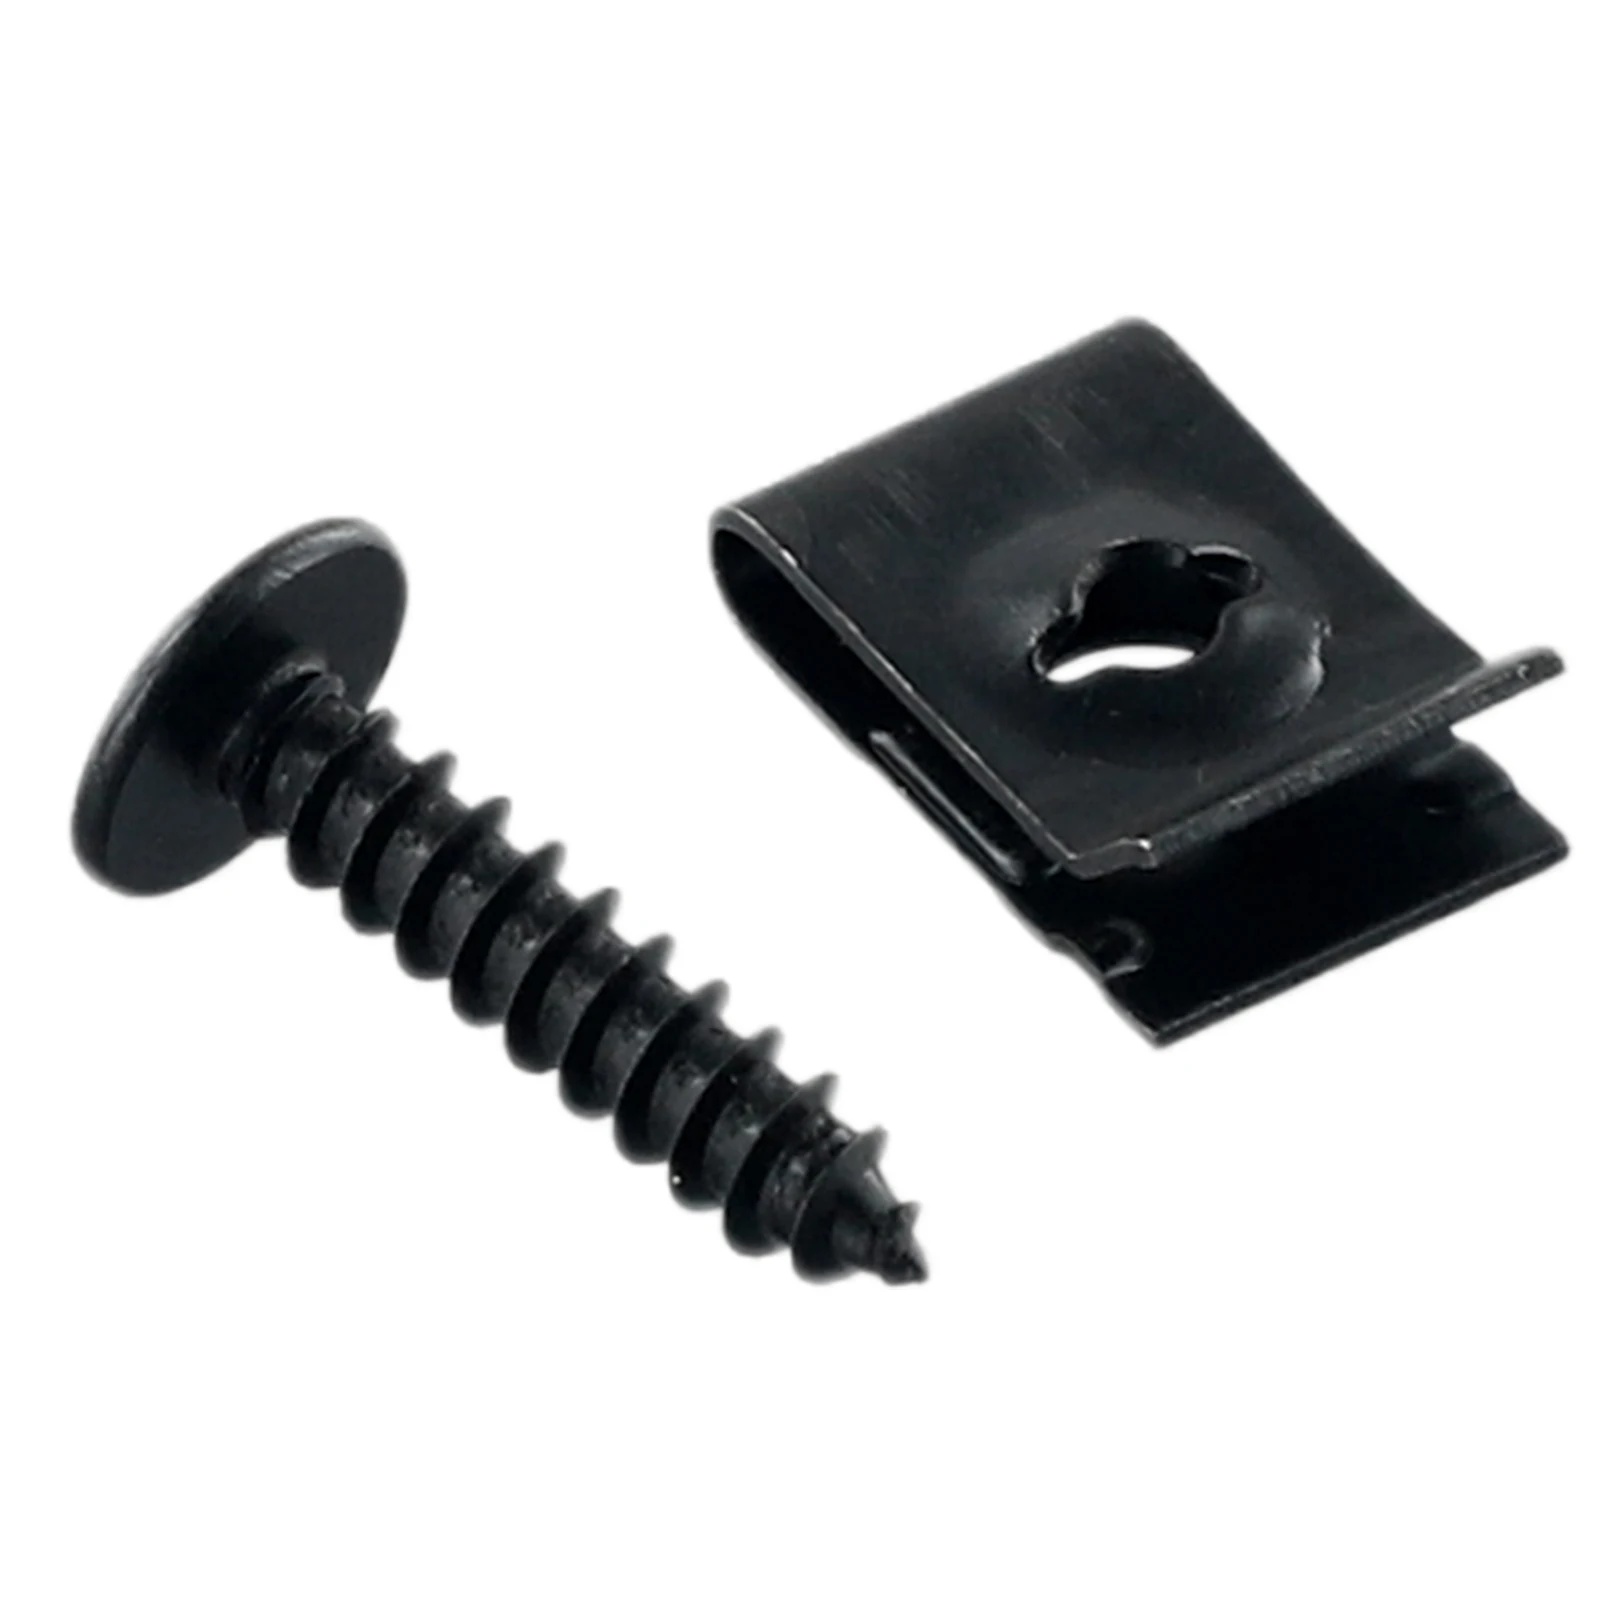 

Car Bumper Fender Trim U-type Clips Metal Panel Fasteners With Screw Accessory New Useful Durable High Quality